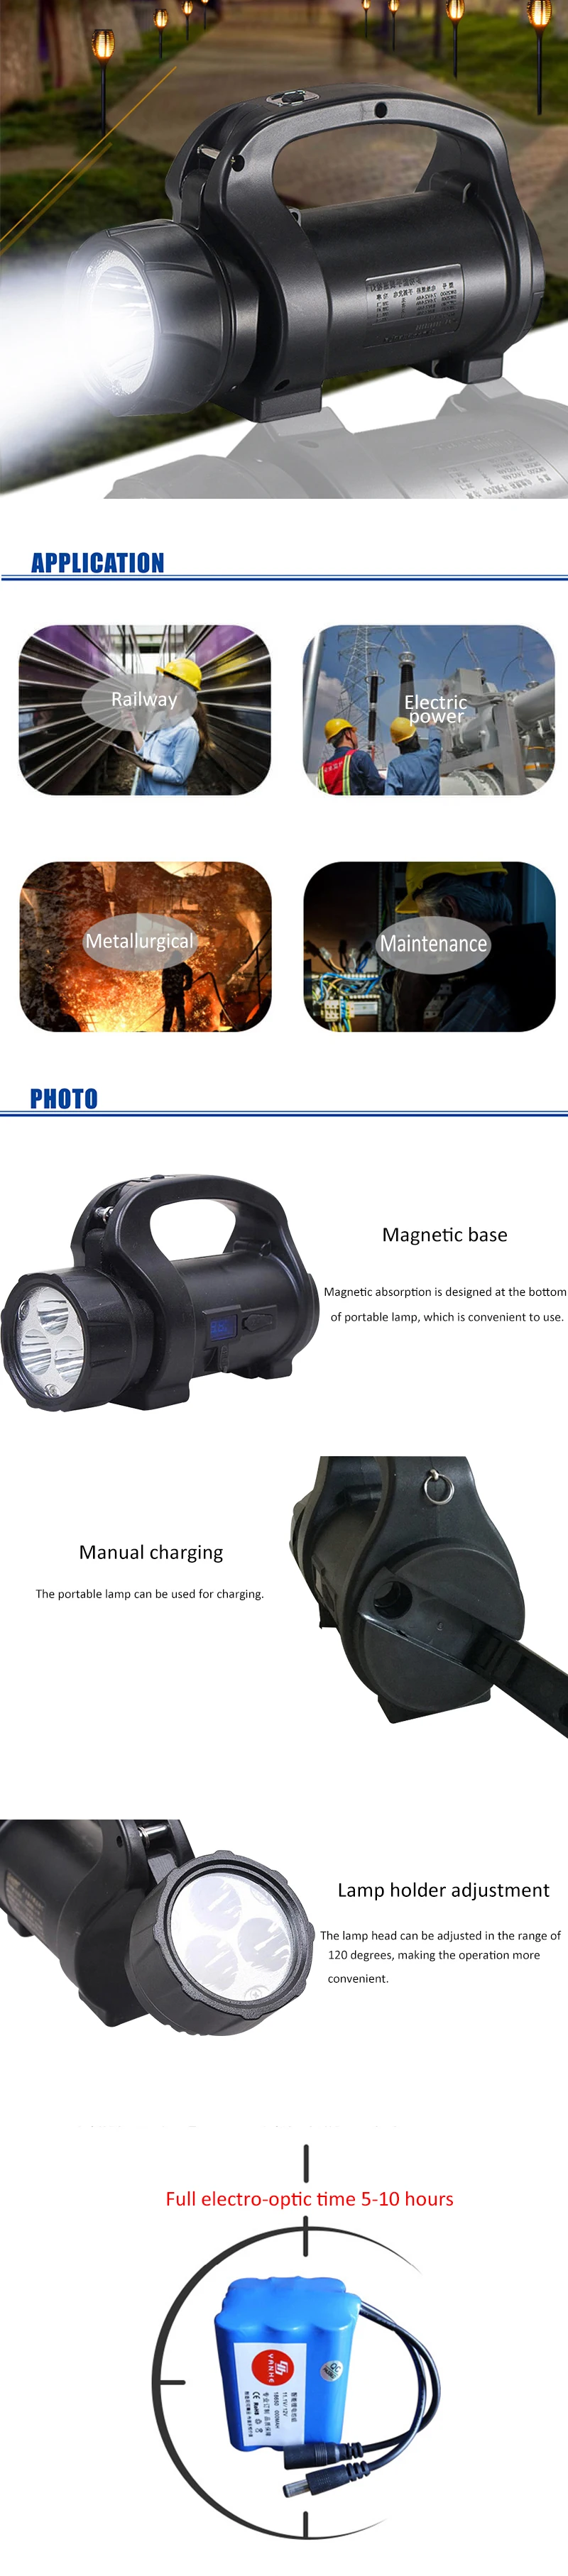 LED Explosion proof handheld searchlight rechargeable portable waterproof searchlight